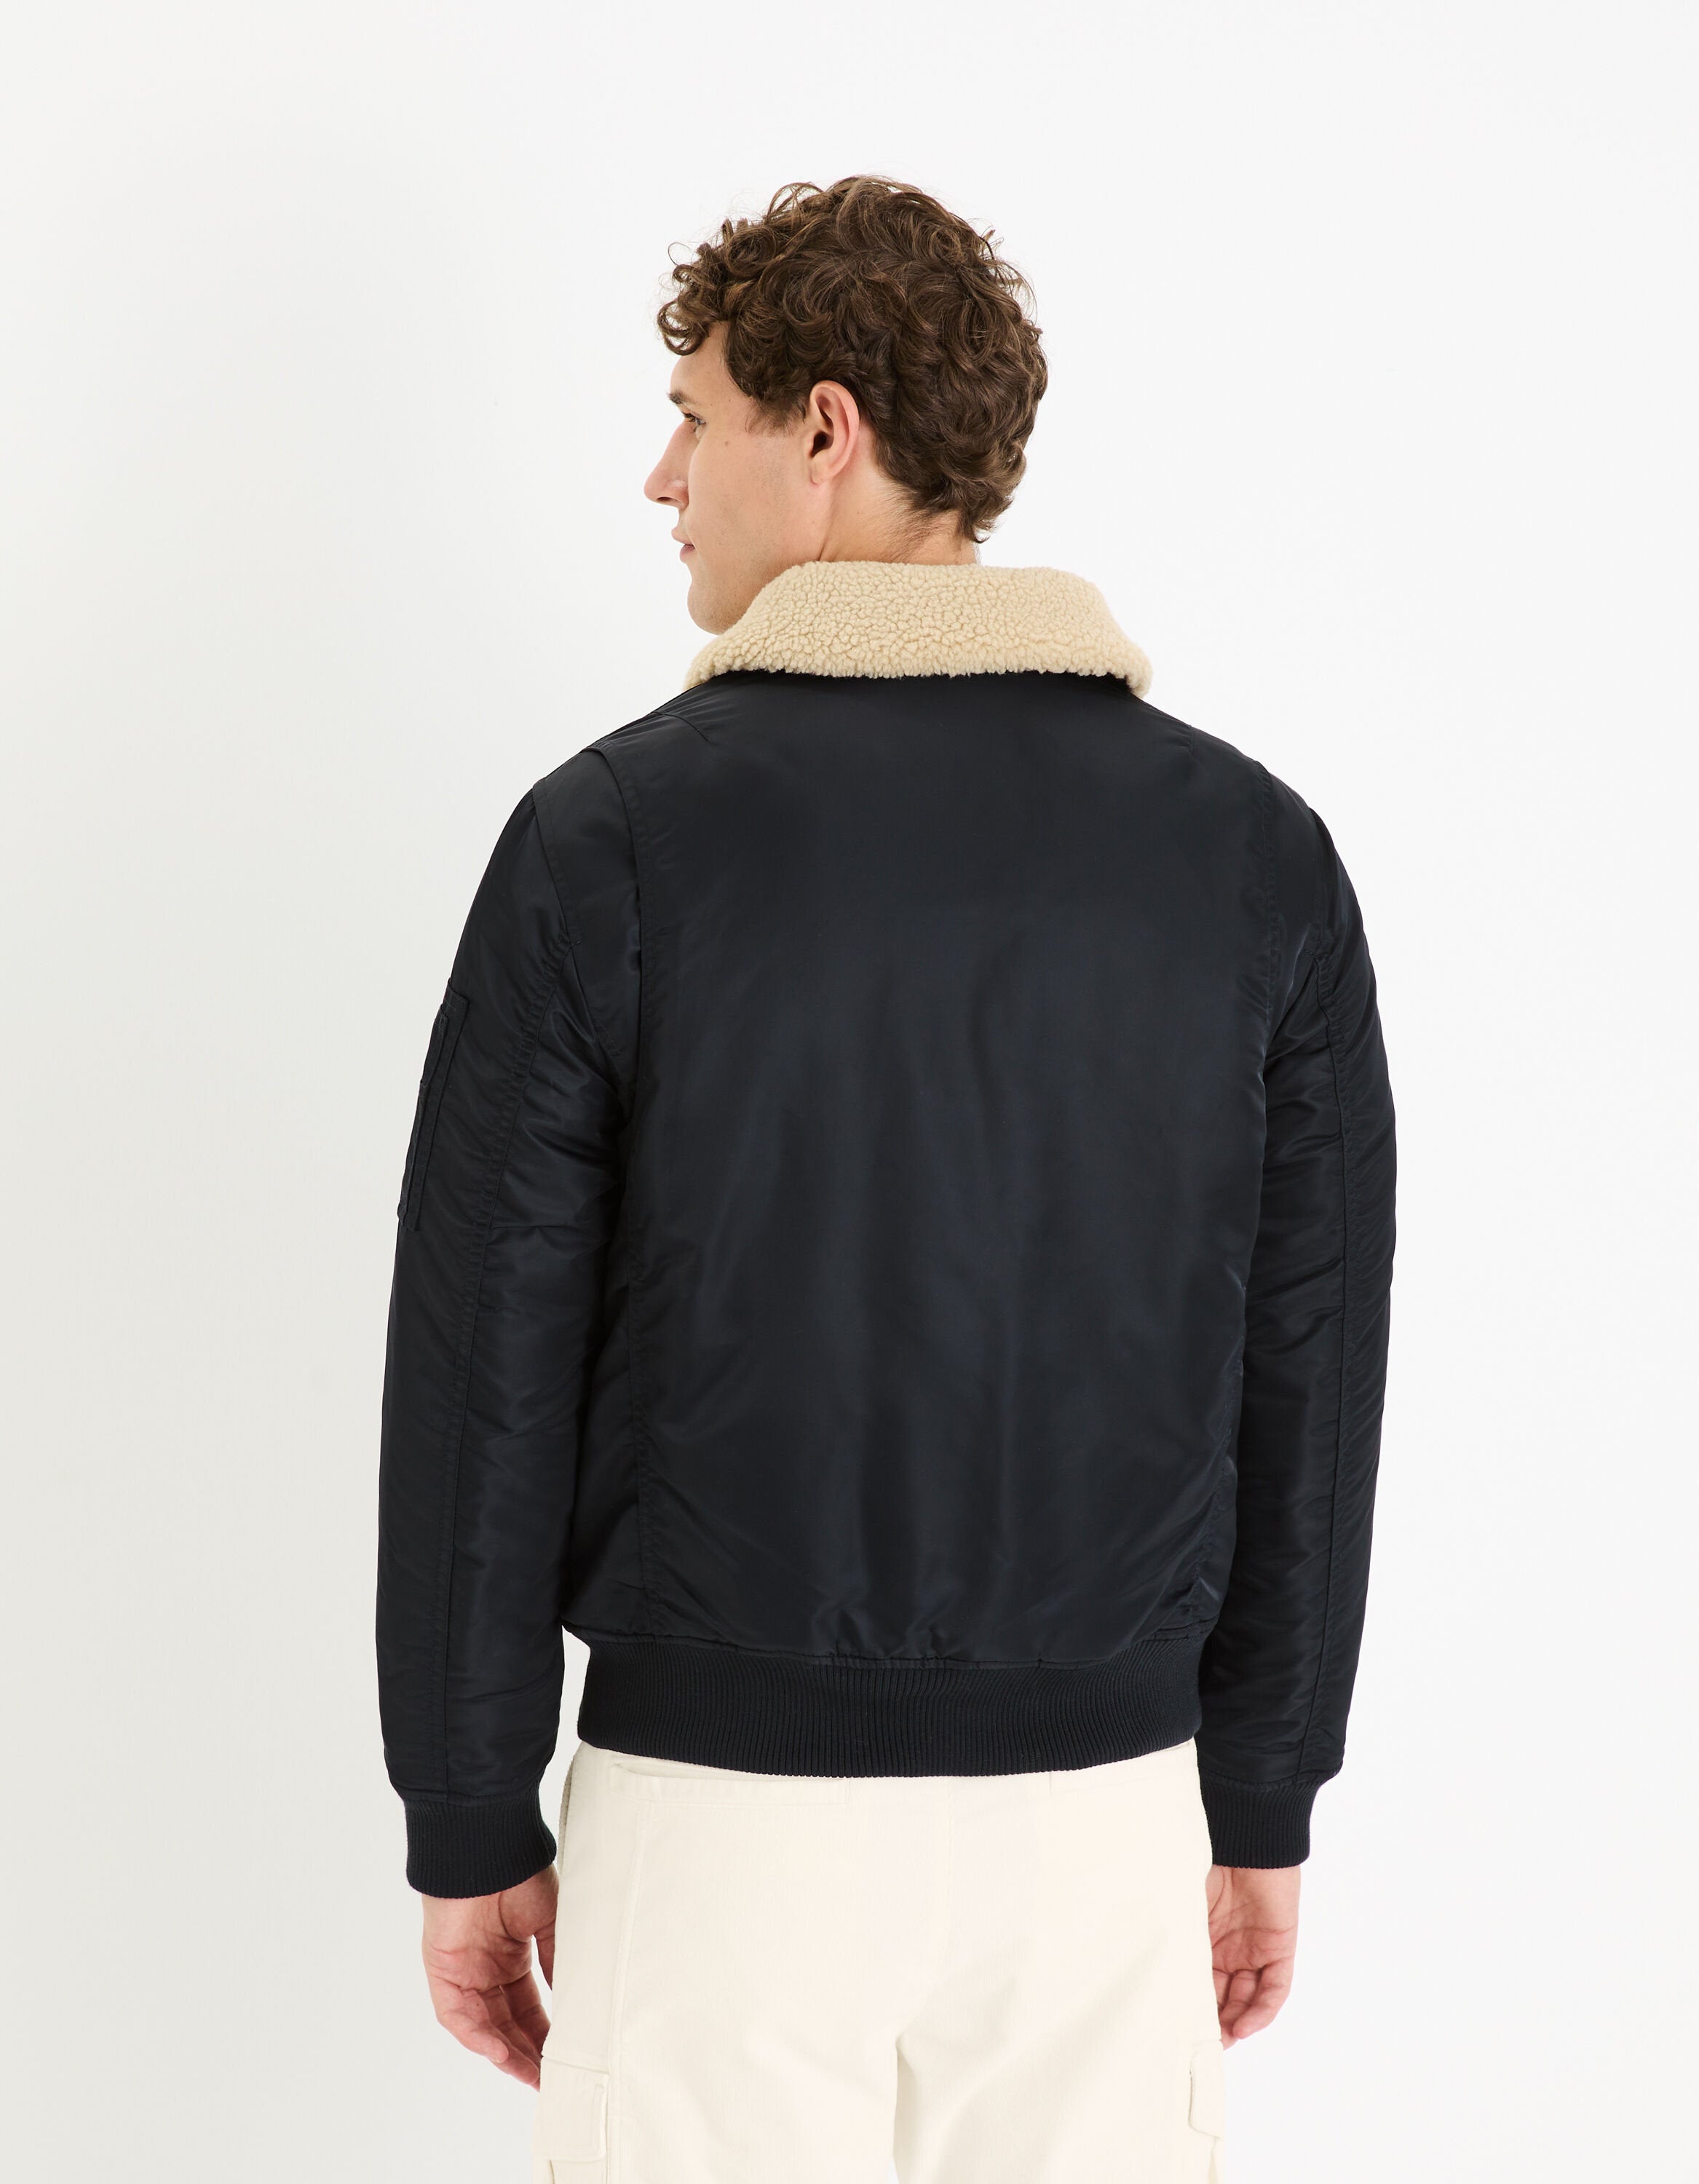 Bomber Down Jacket Lined With Sherpa_FUJAMESCOL_NAVY_04